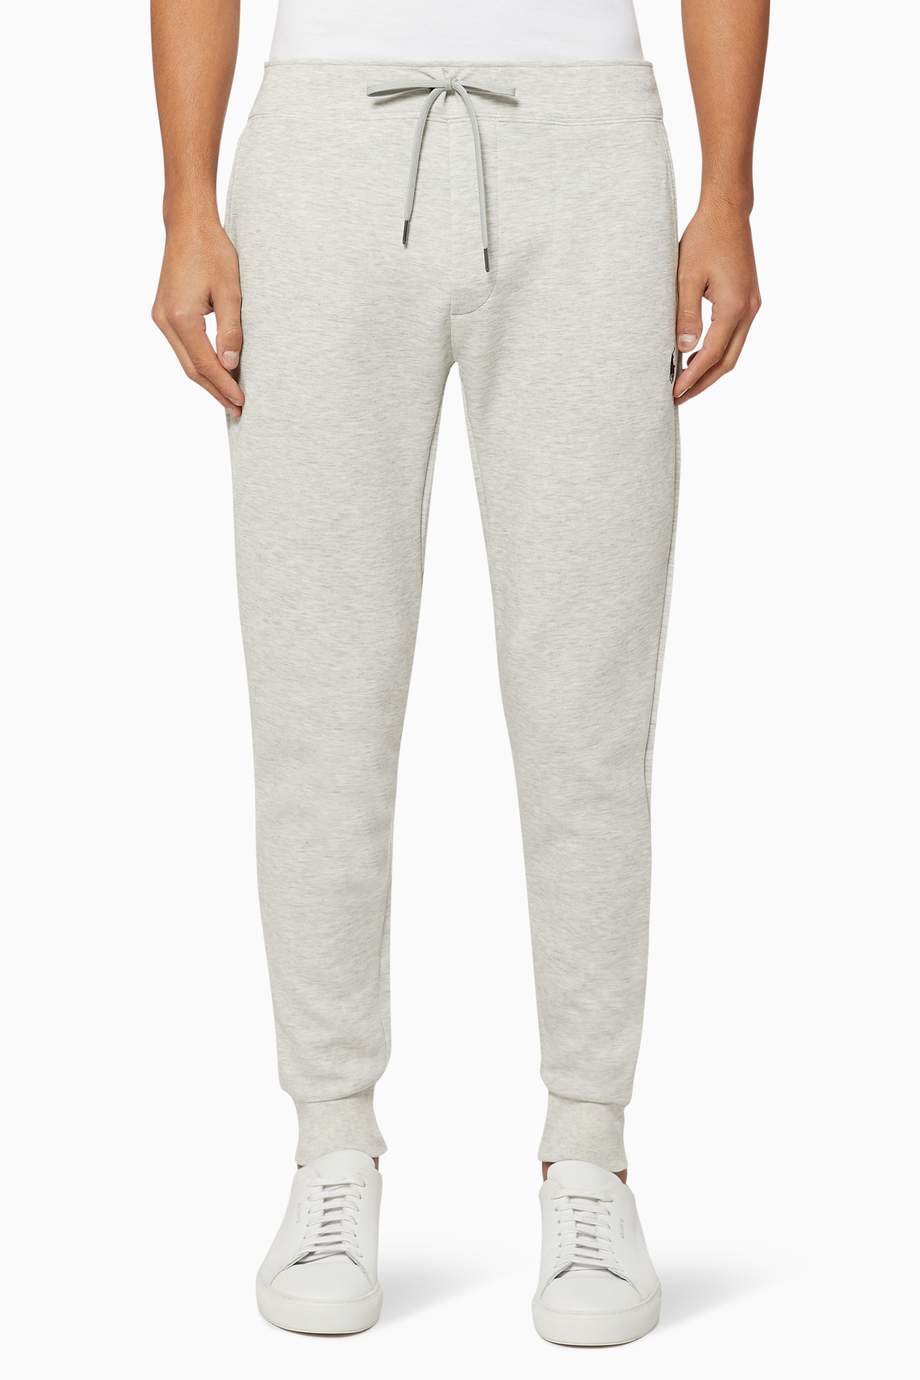 Shop Polo Ralph Lauren Grey Double-Knitted Joggers for Men | Ounass UAE